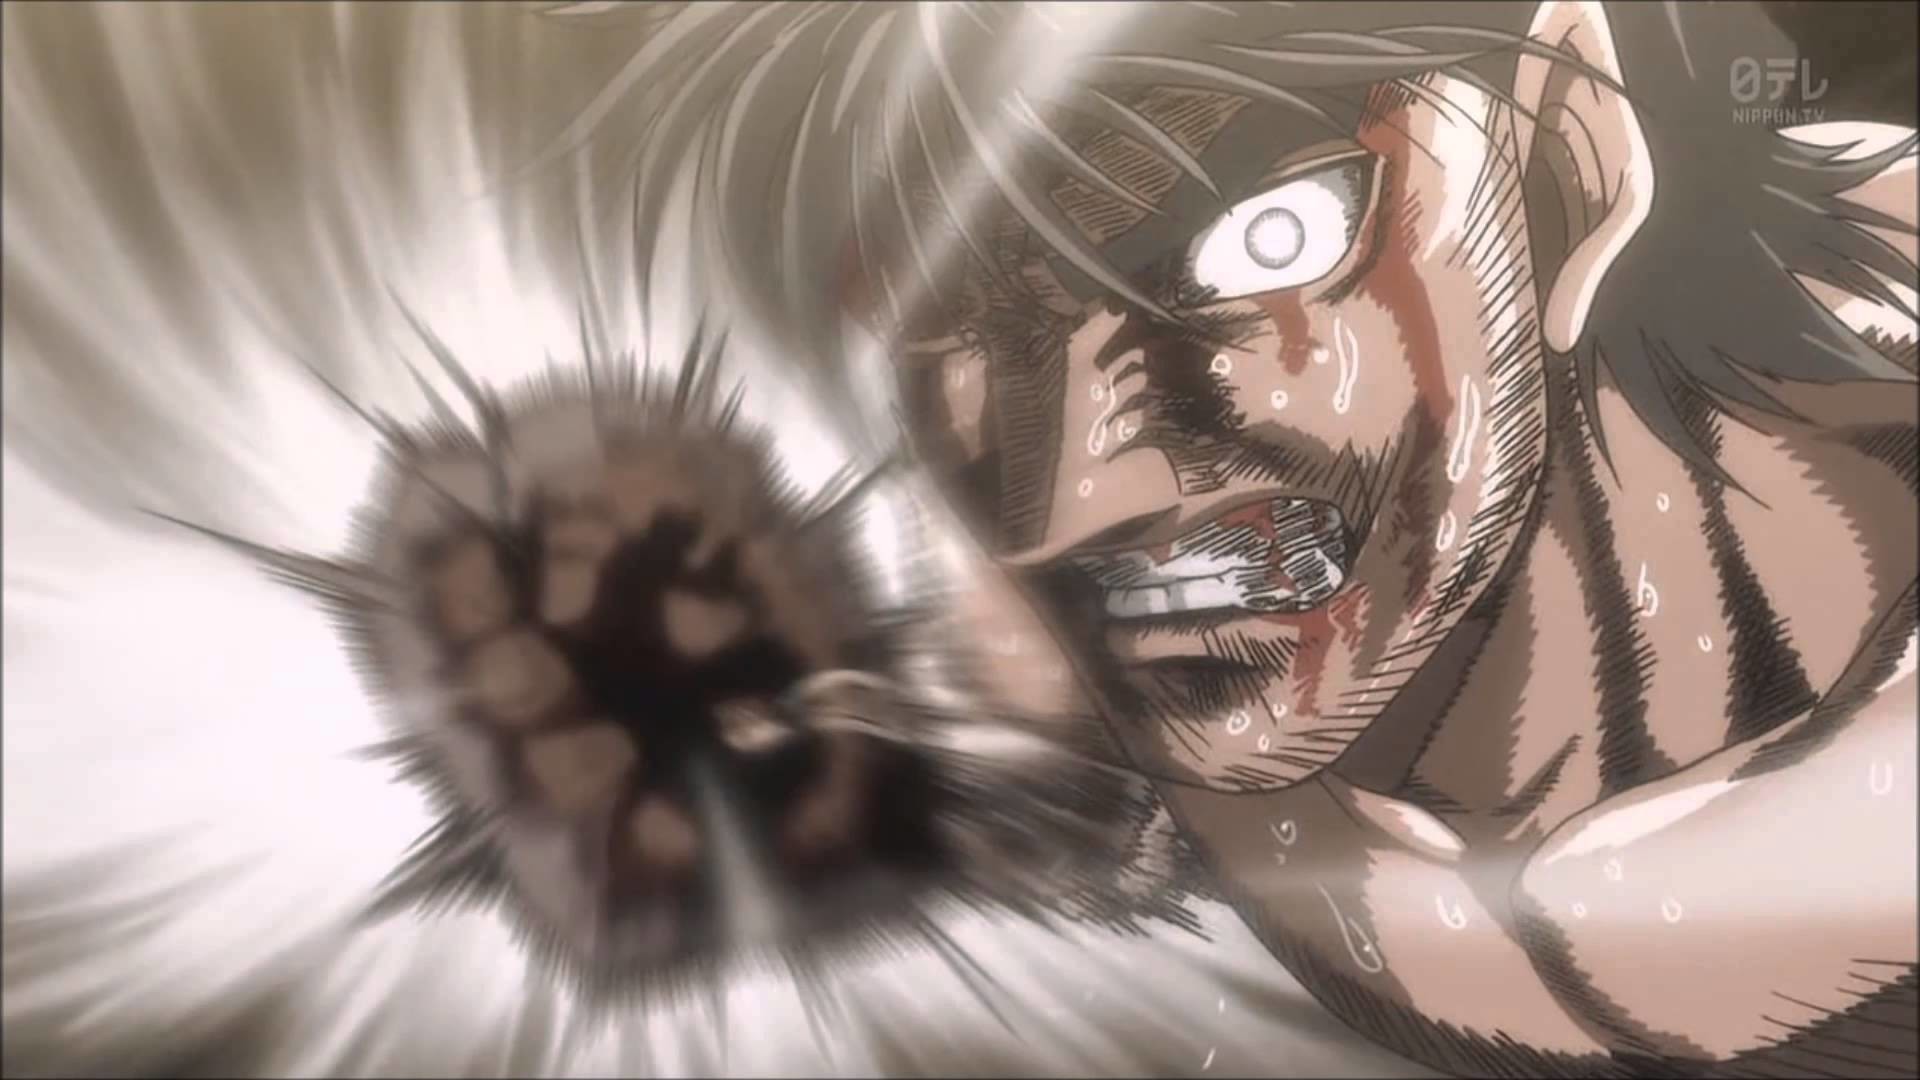 1920x1080 Hajime no Ippo Epic OST - The Finisher